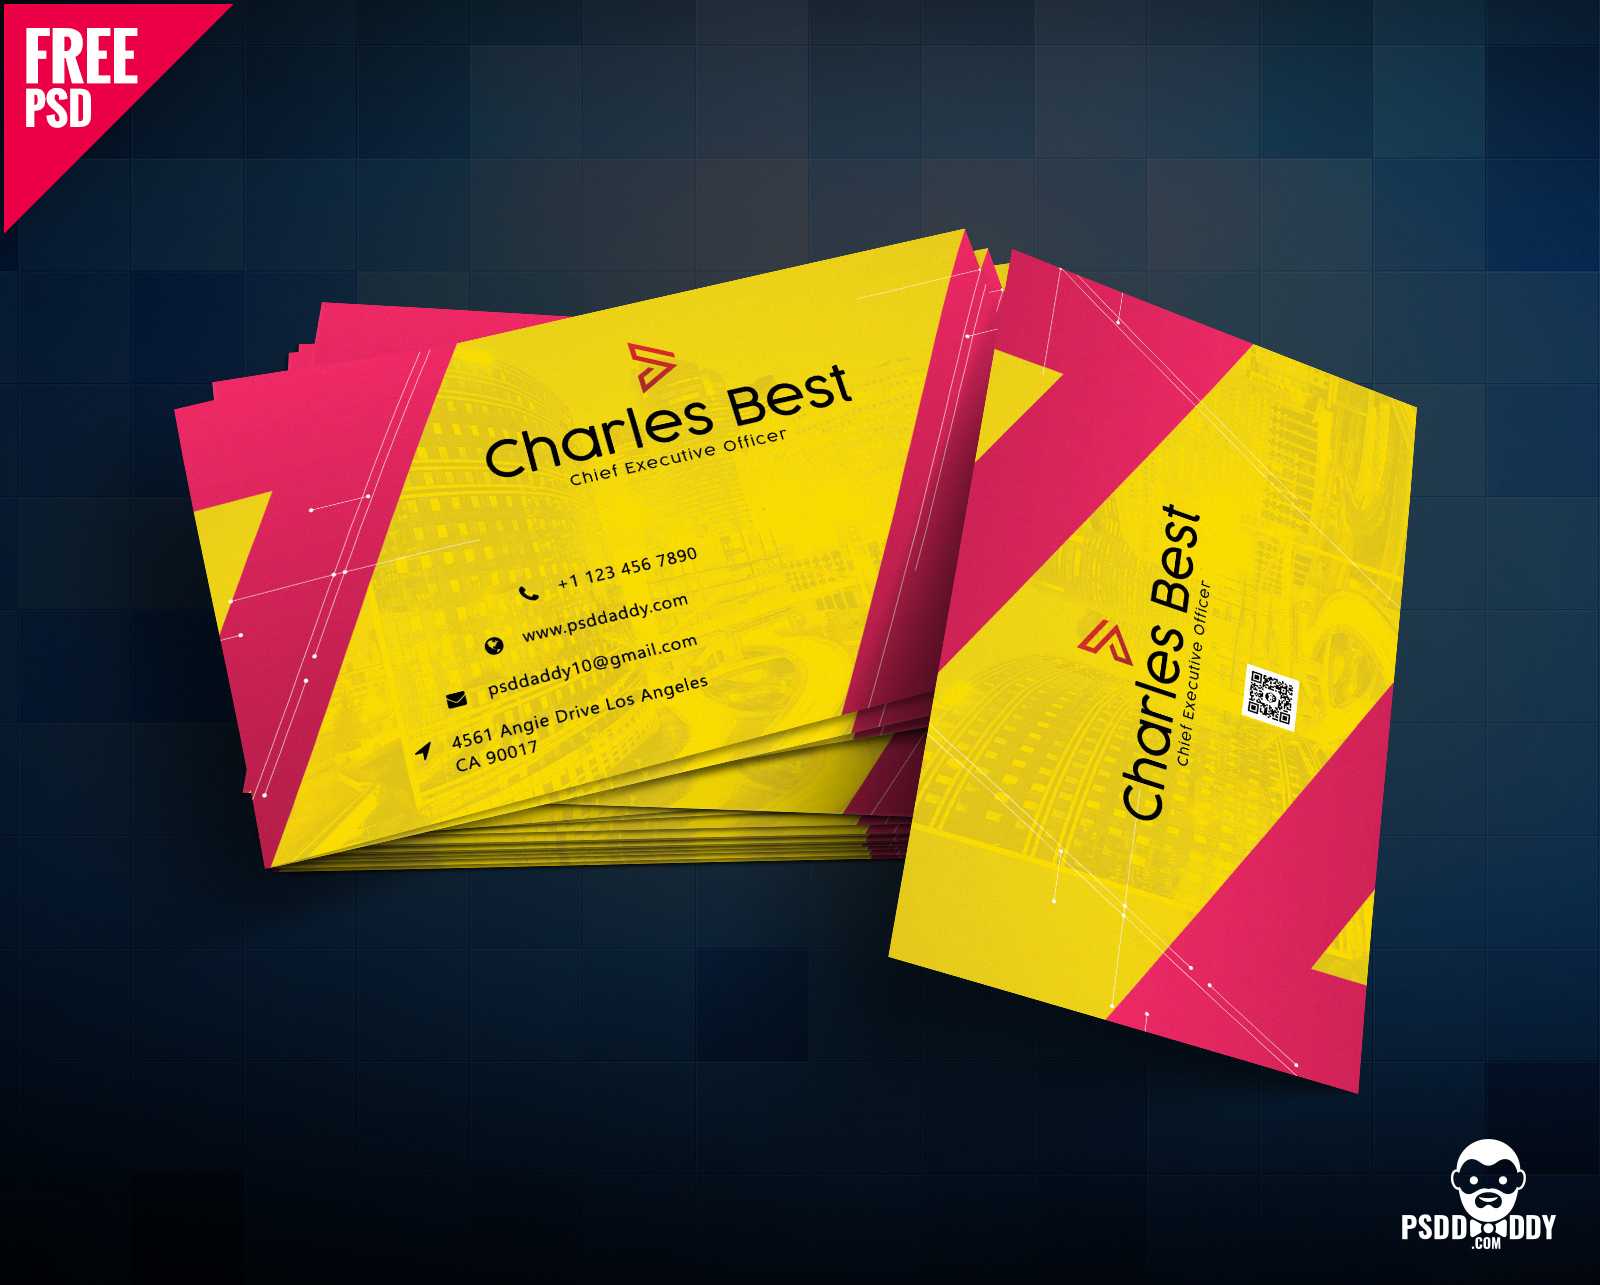 Download] Creative Business Card Free Psd | Psddaddy Within Free Complimentary Card Templates